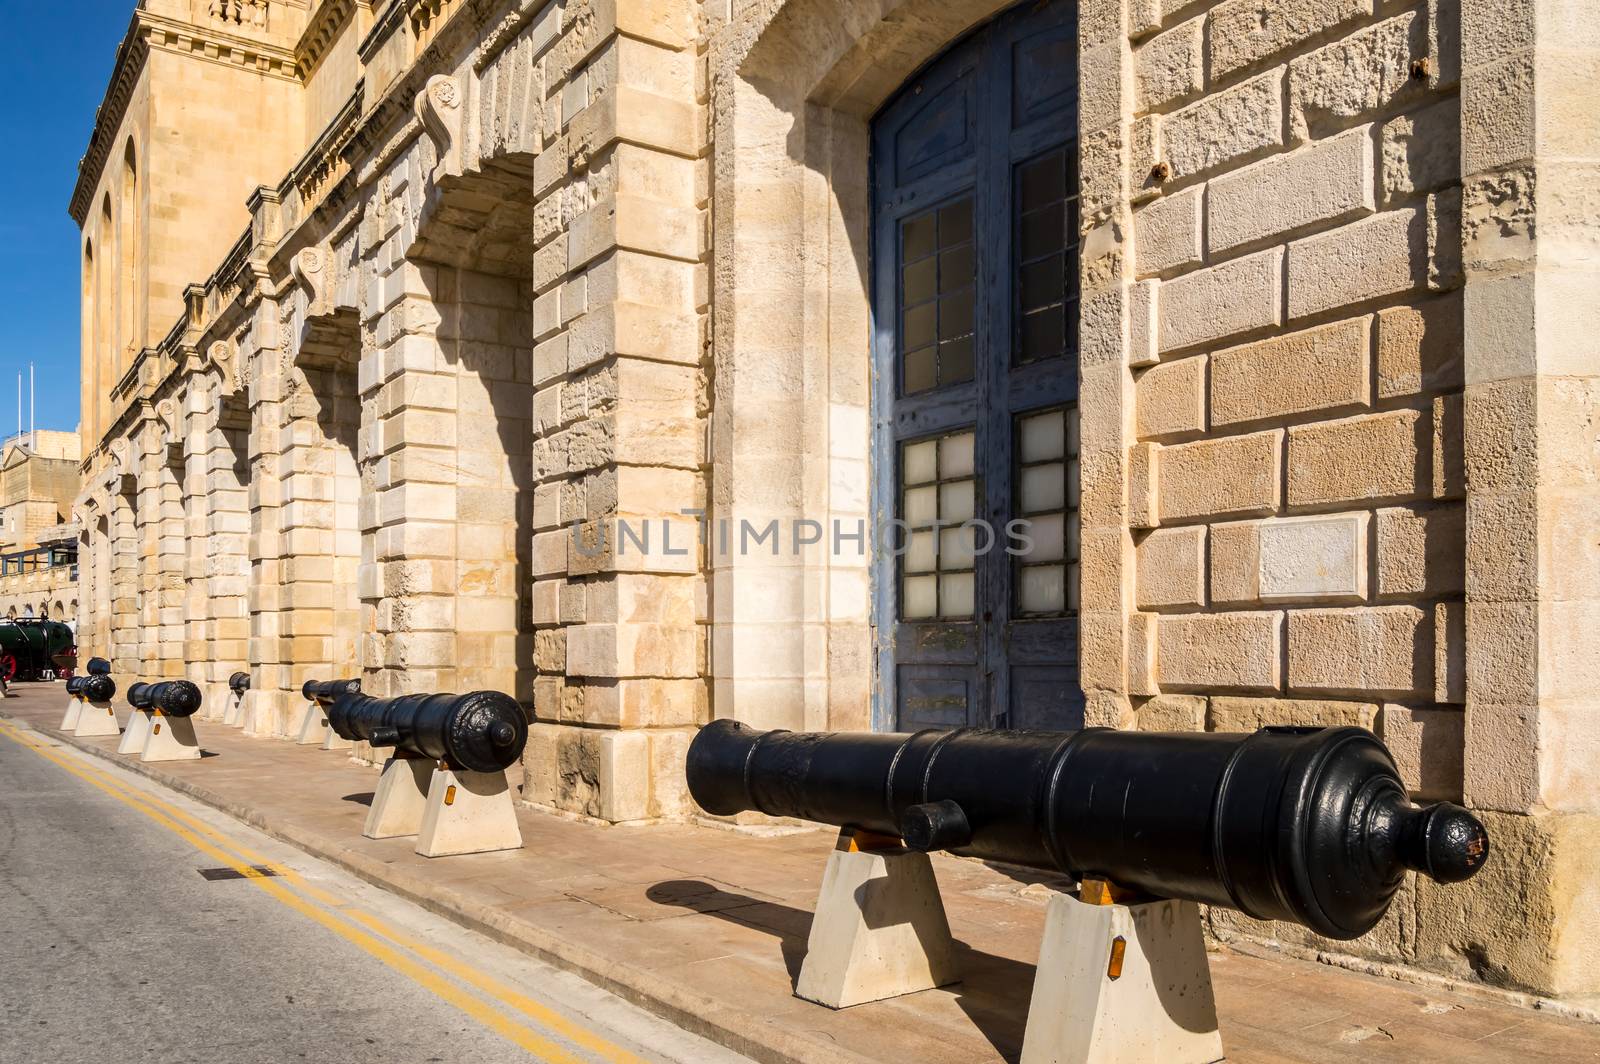 Old cannons lined up in front of the facade  by Philou1000